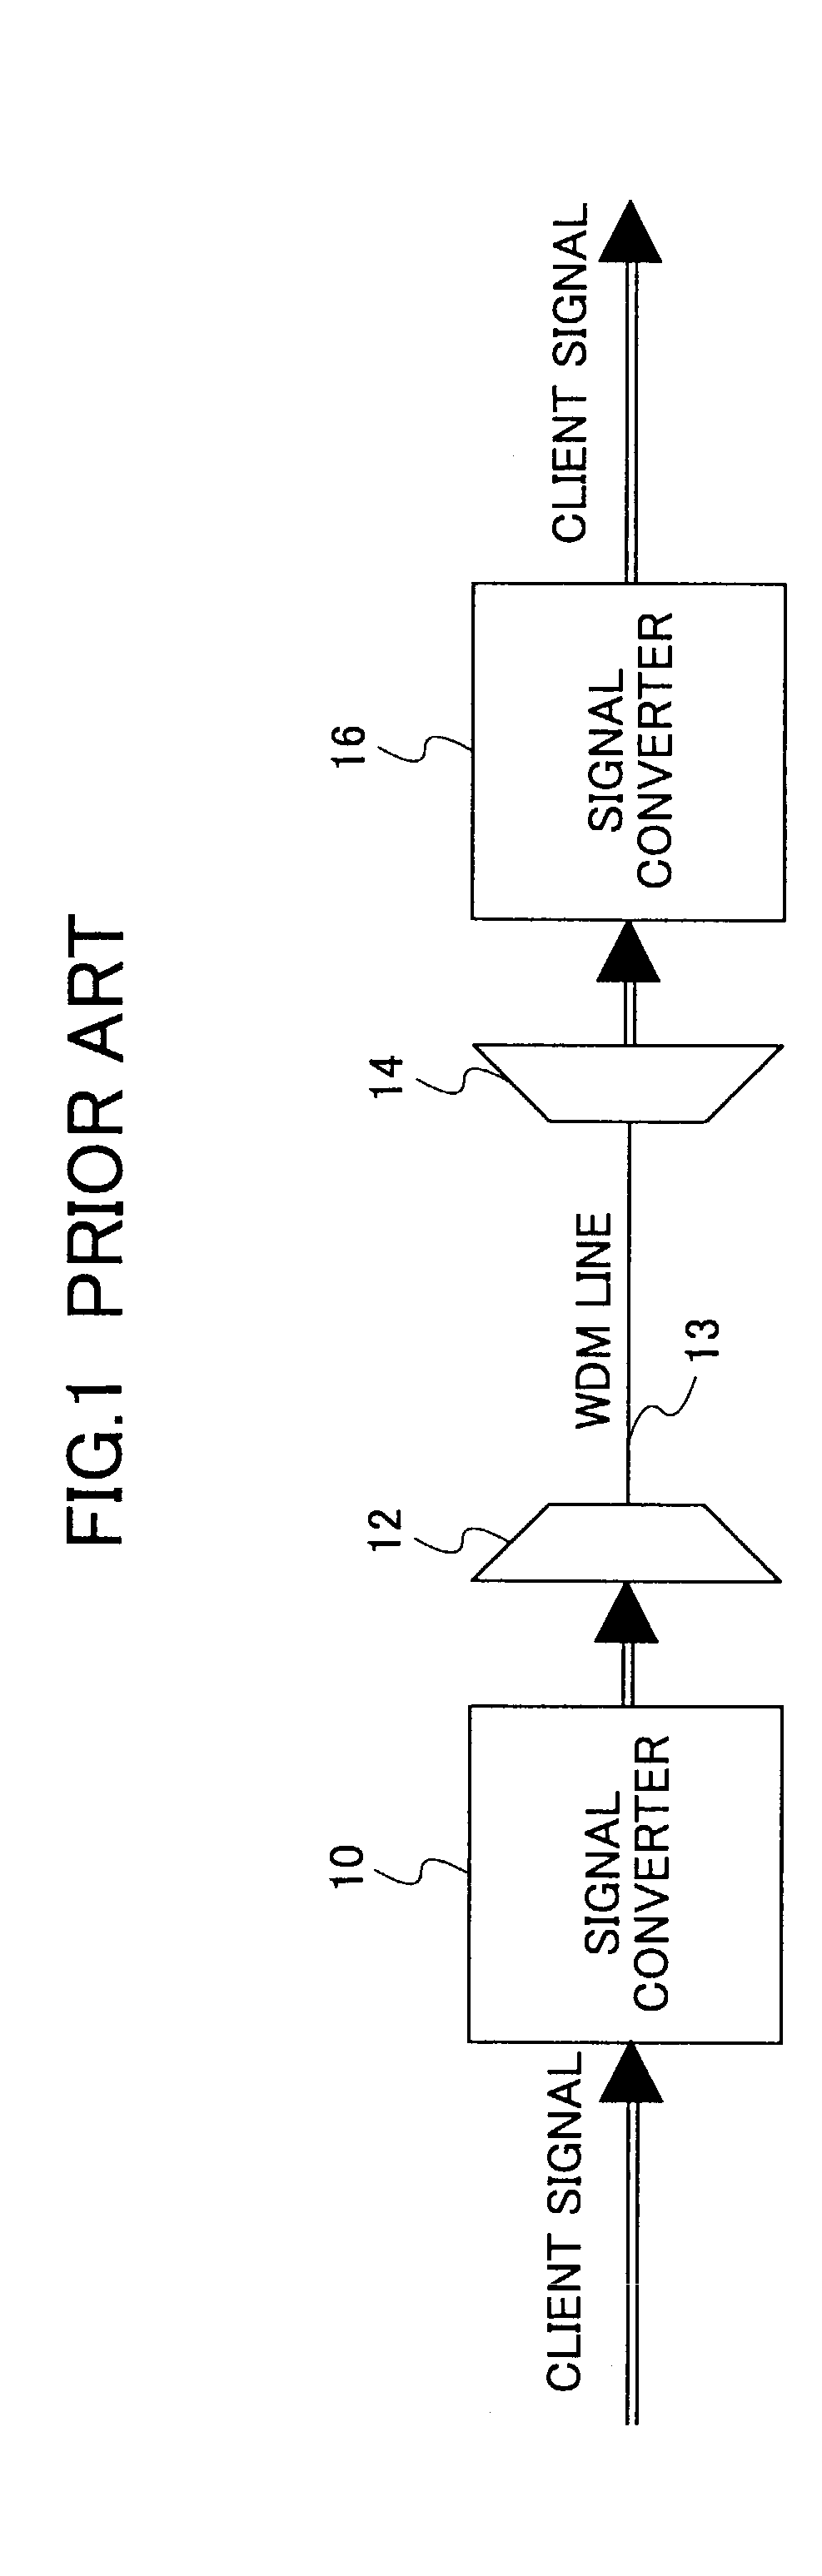 WDM device, client device, network, system and method for allocating wavelength of WDM to a client signal